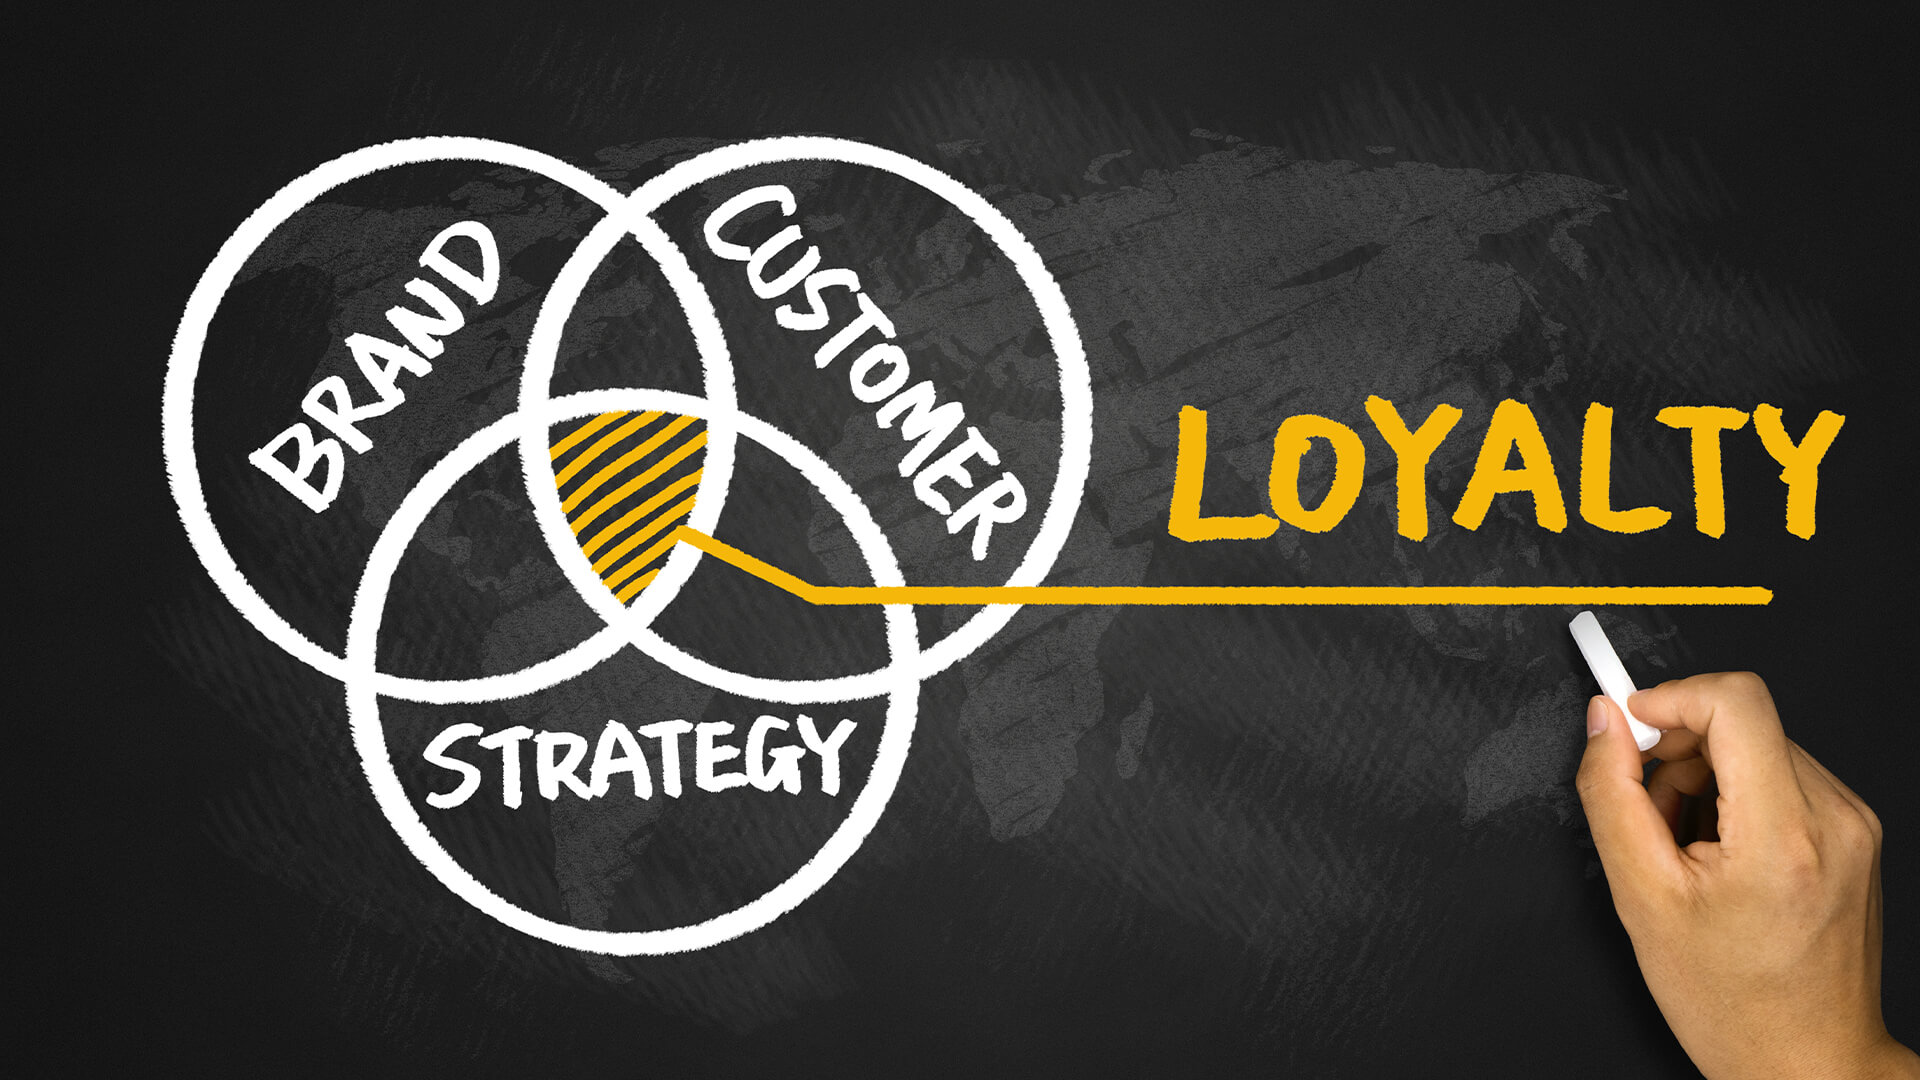 How to Improve Customer Loyalty for Your Business